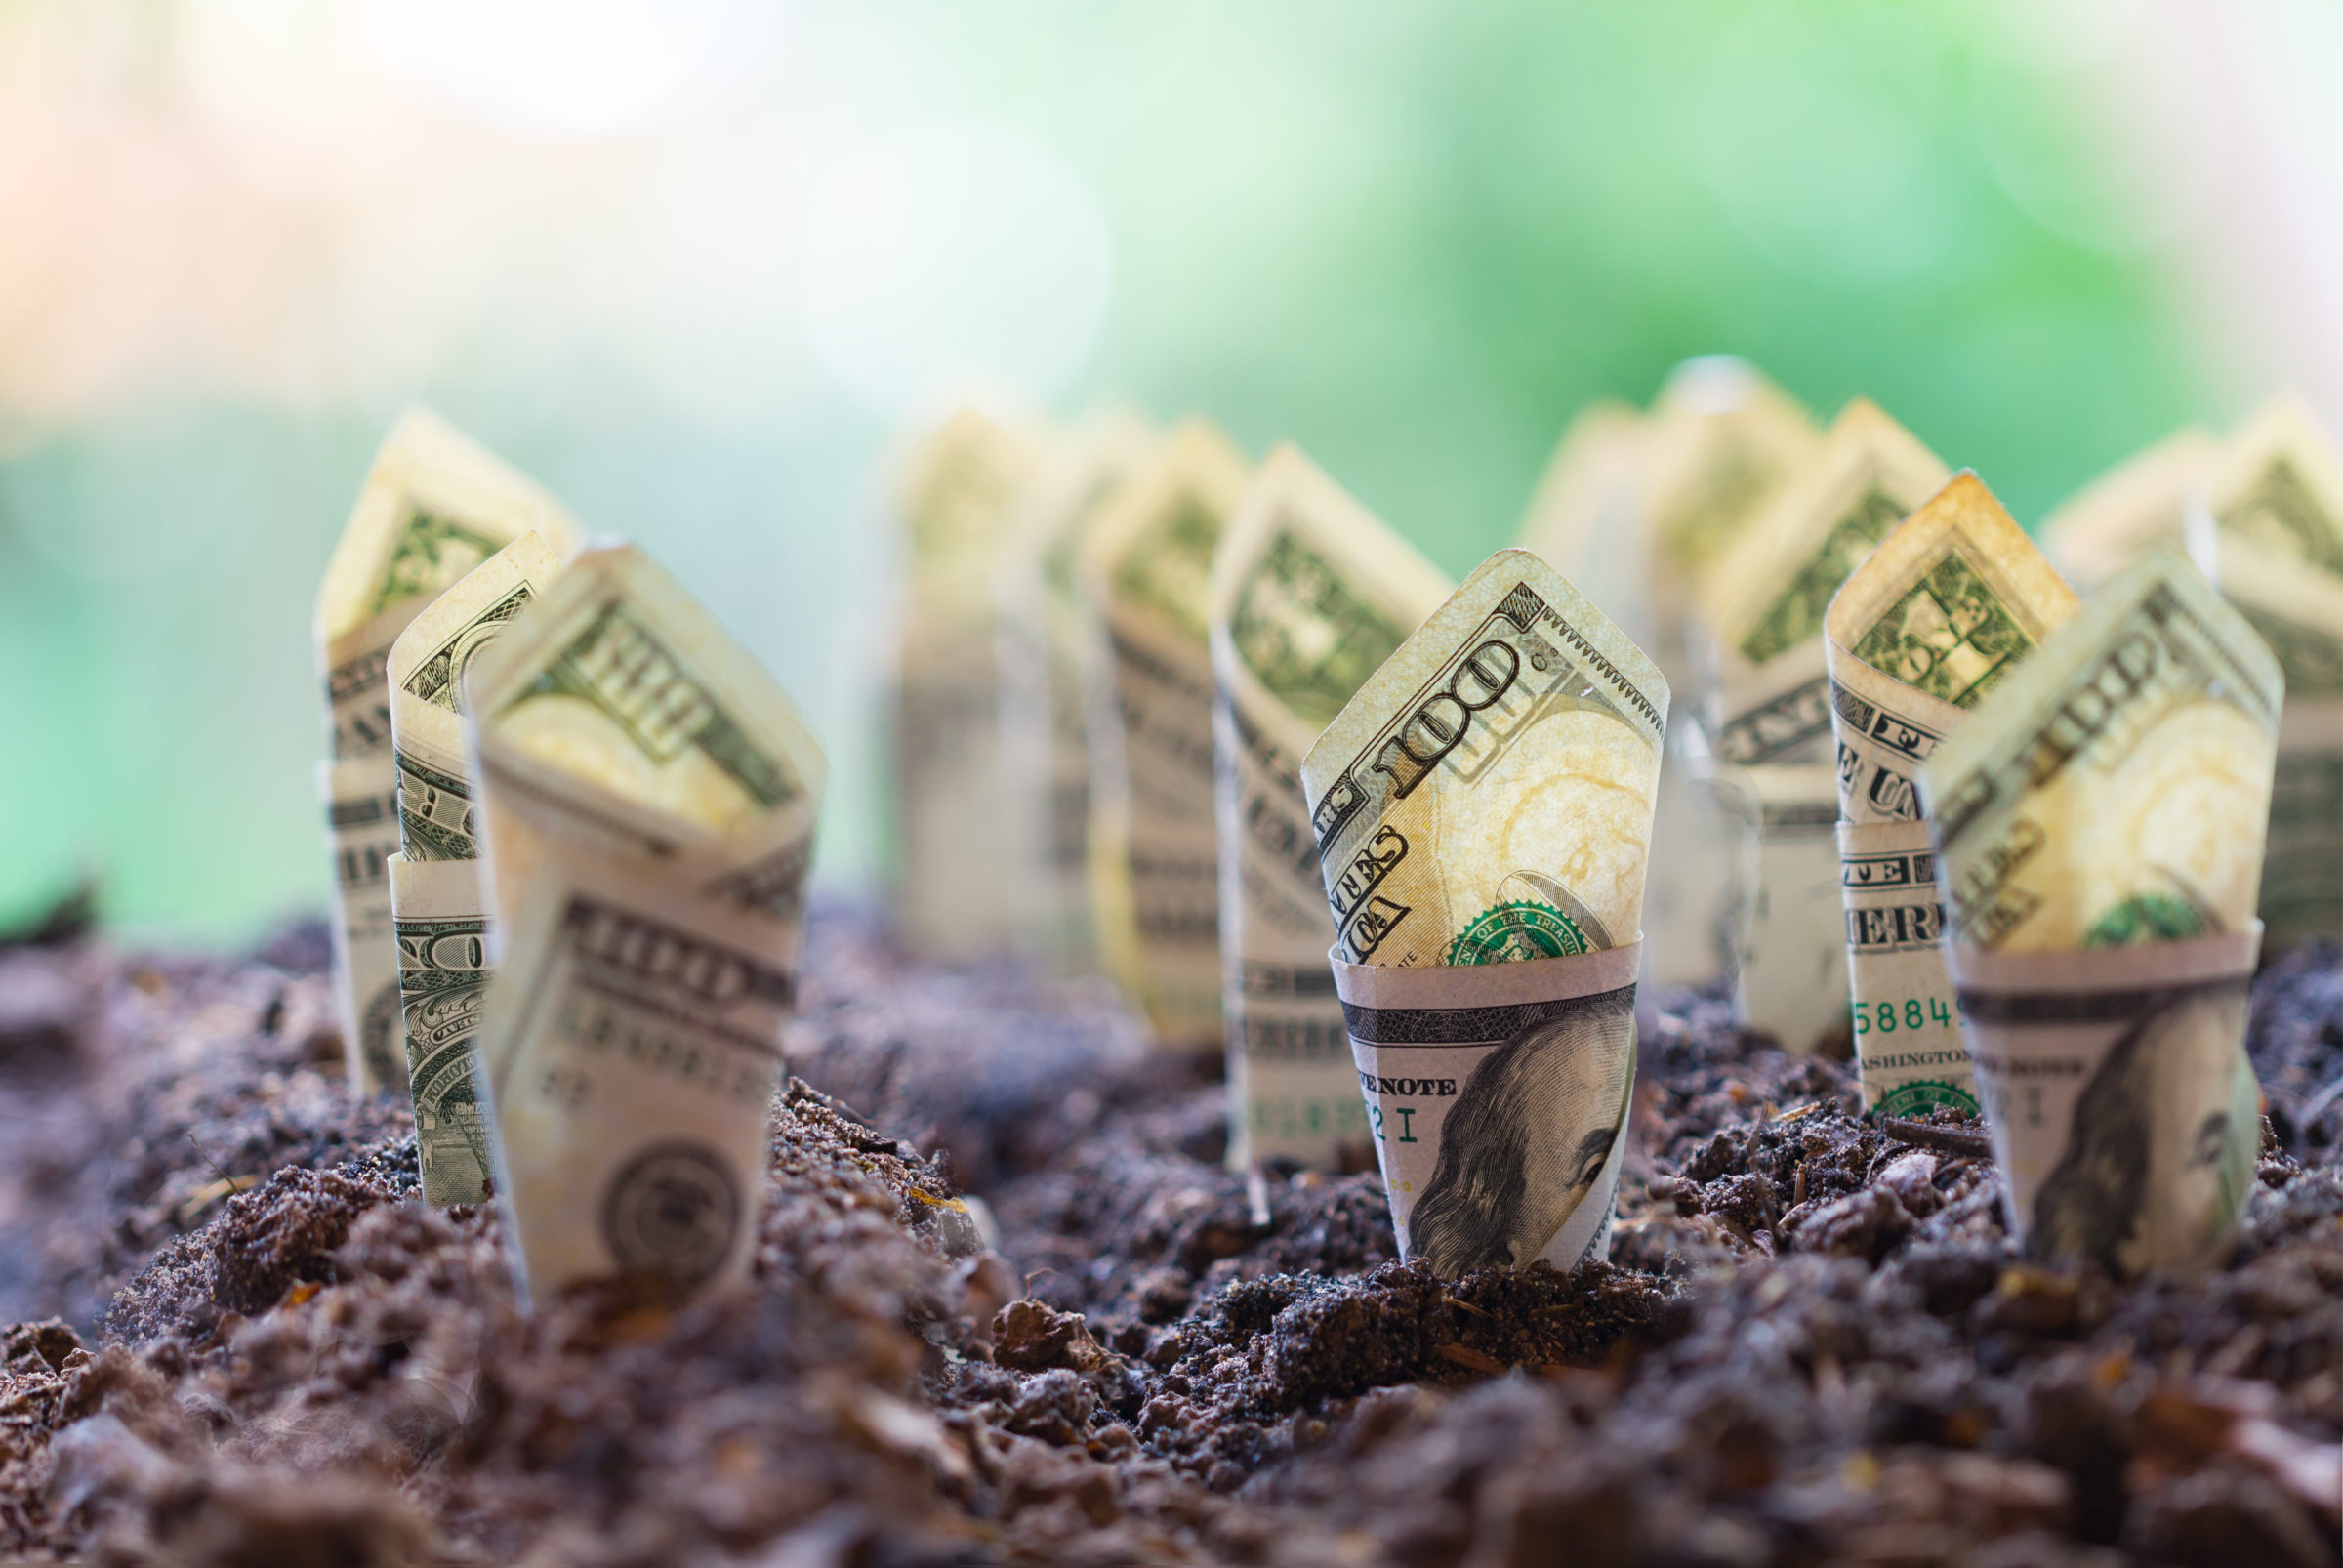 Dollar bill plant growth from ground.Concept of money tree growing from American dollars